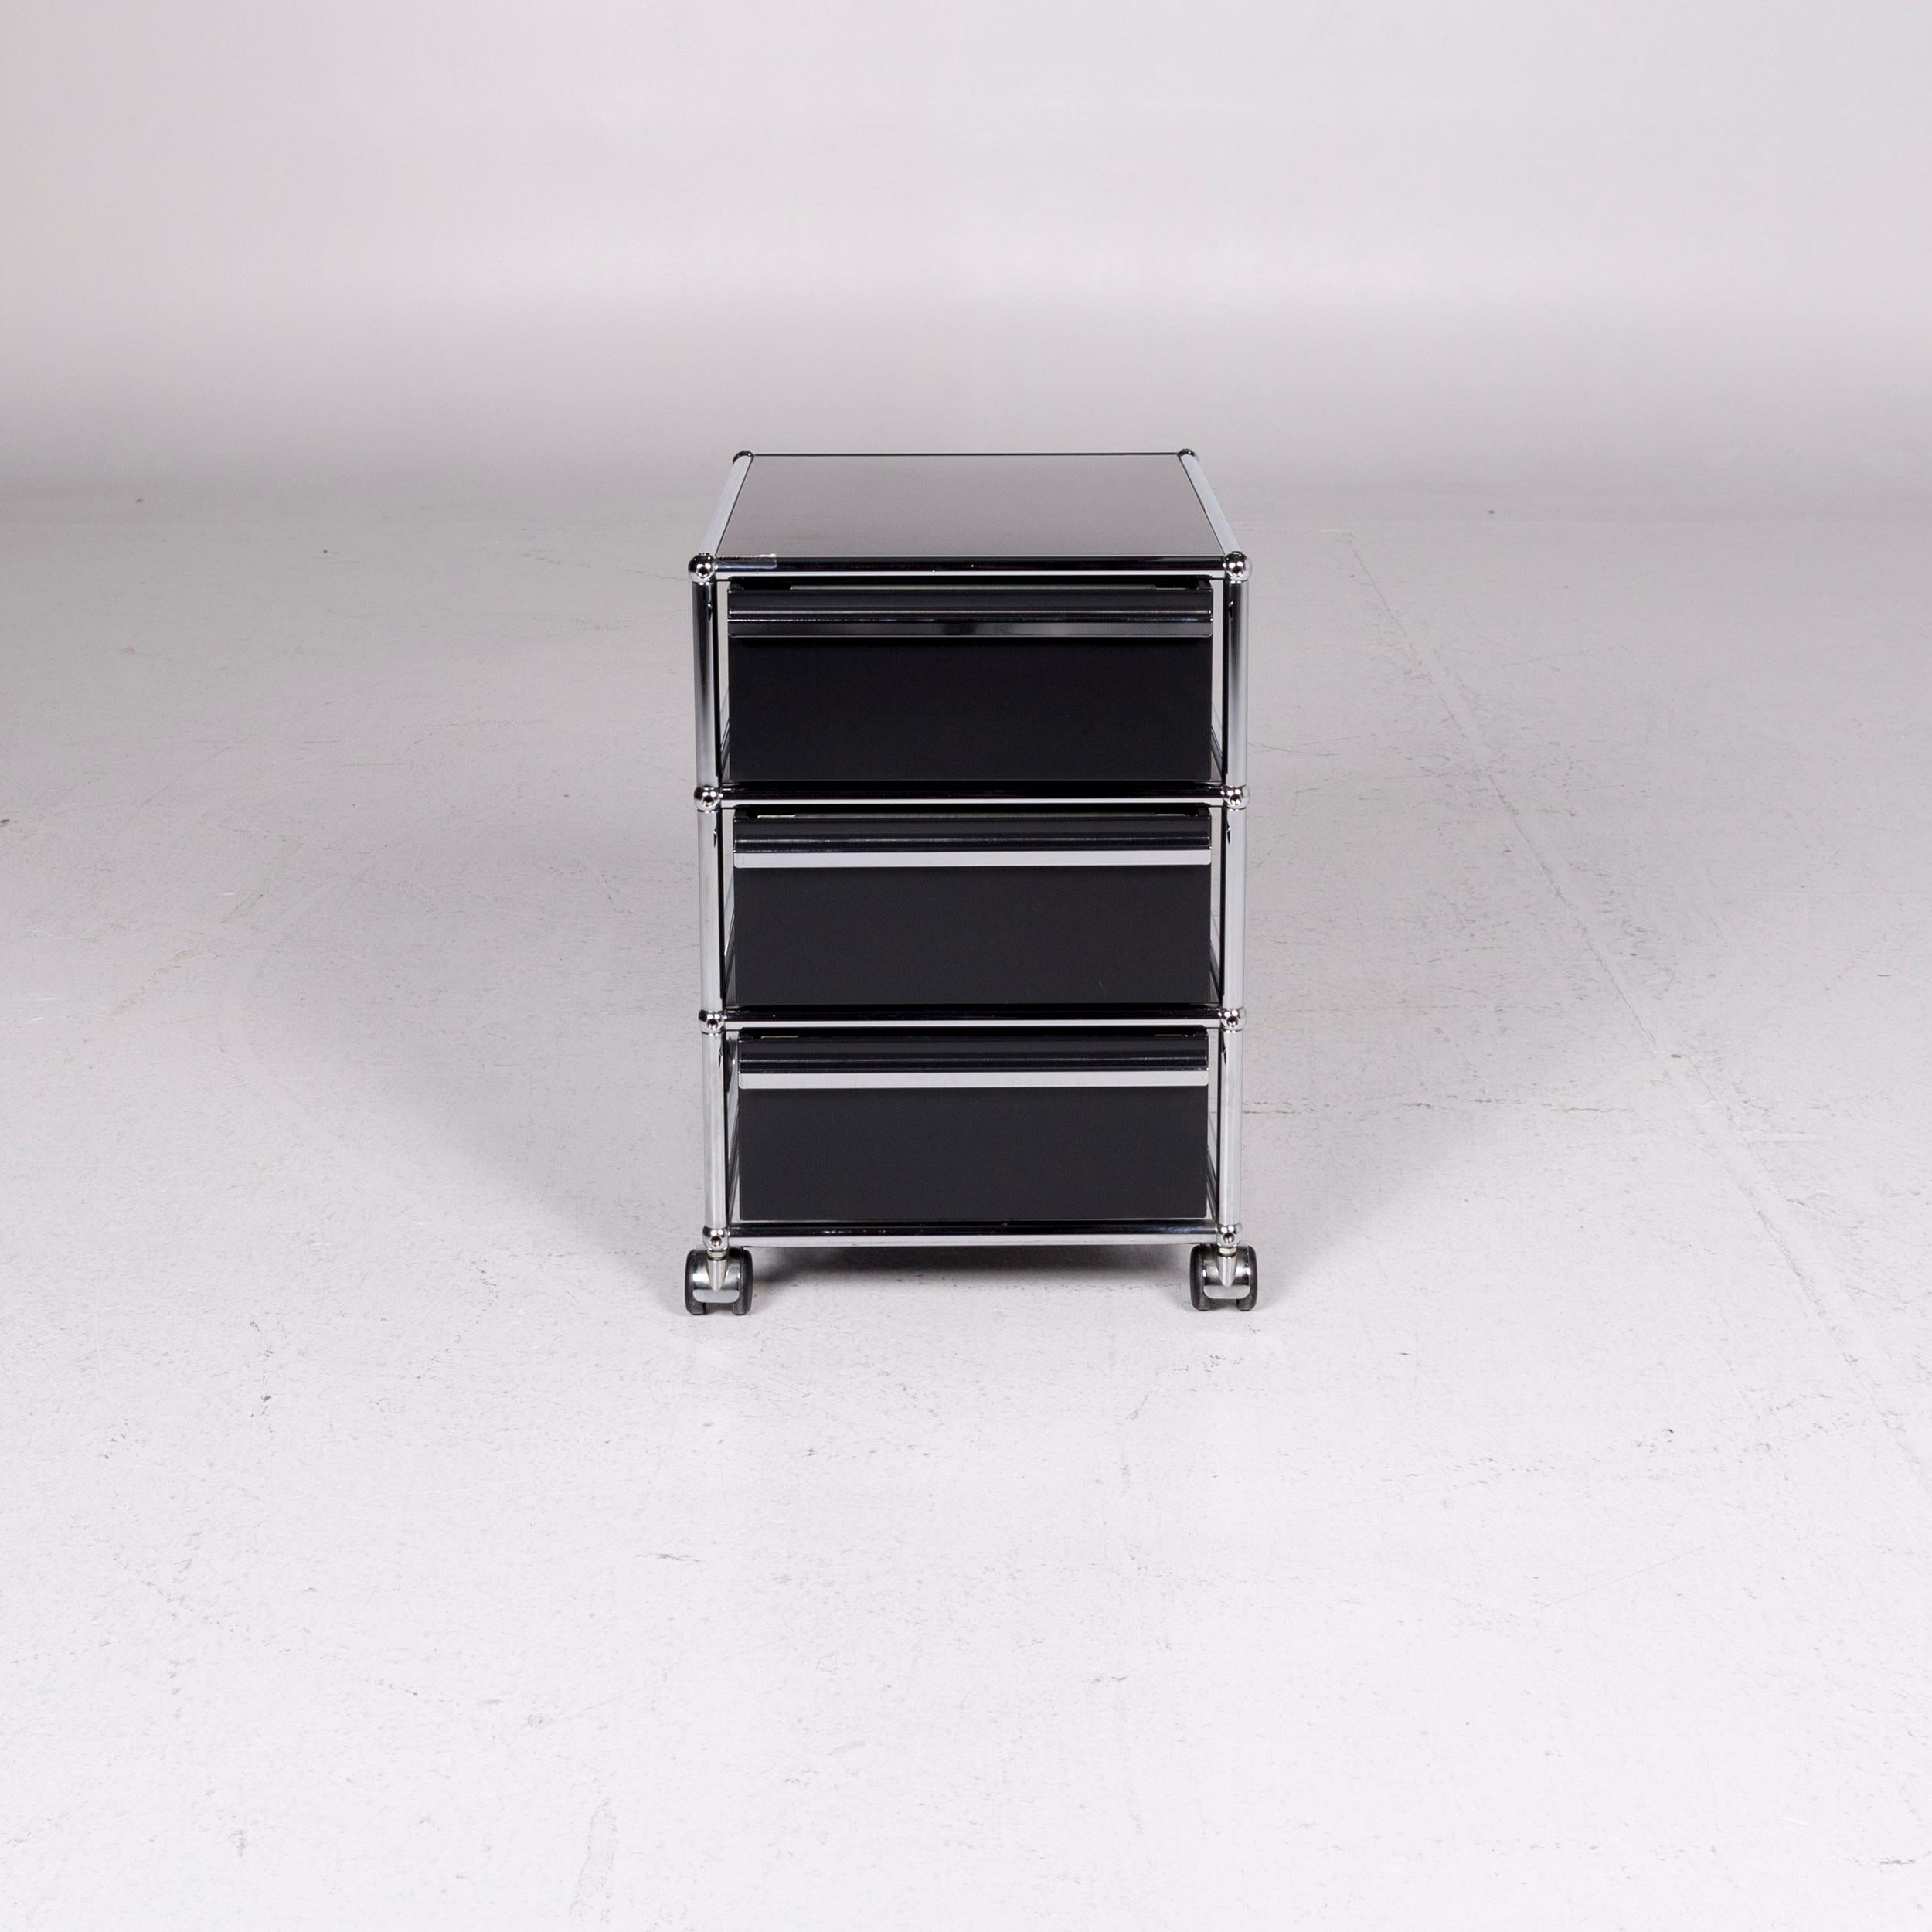 We bring to you an Usm Haller metal roll container black sideboard office furniture.
 

 Product measurements in centimeters:
 

Depth 53
 Width 42
 Height 61.





 